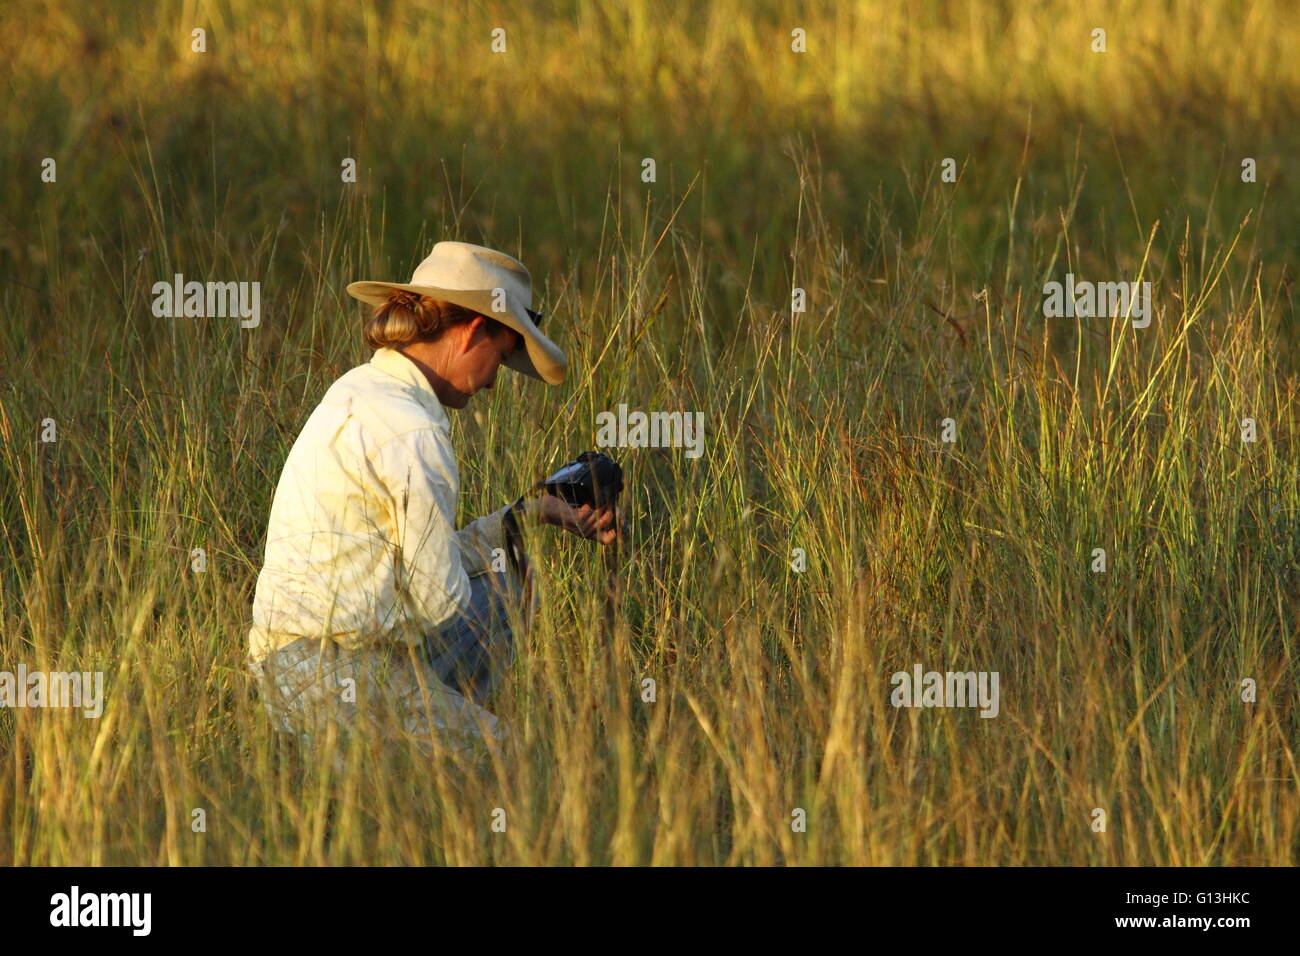 A lady in her thirties looking at the back of her camera as she kneels in a field of grass while wearing a cowboy hat. Stock Photo